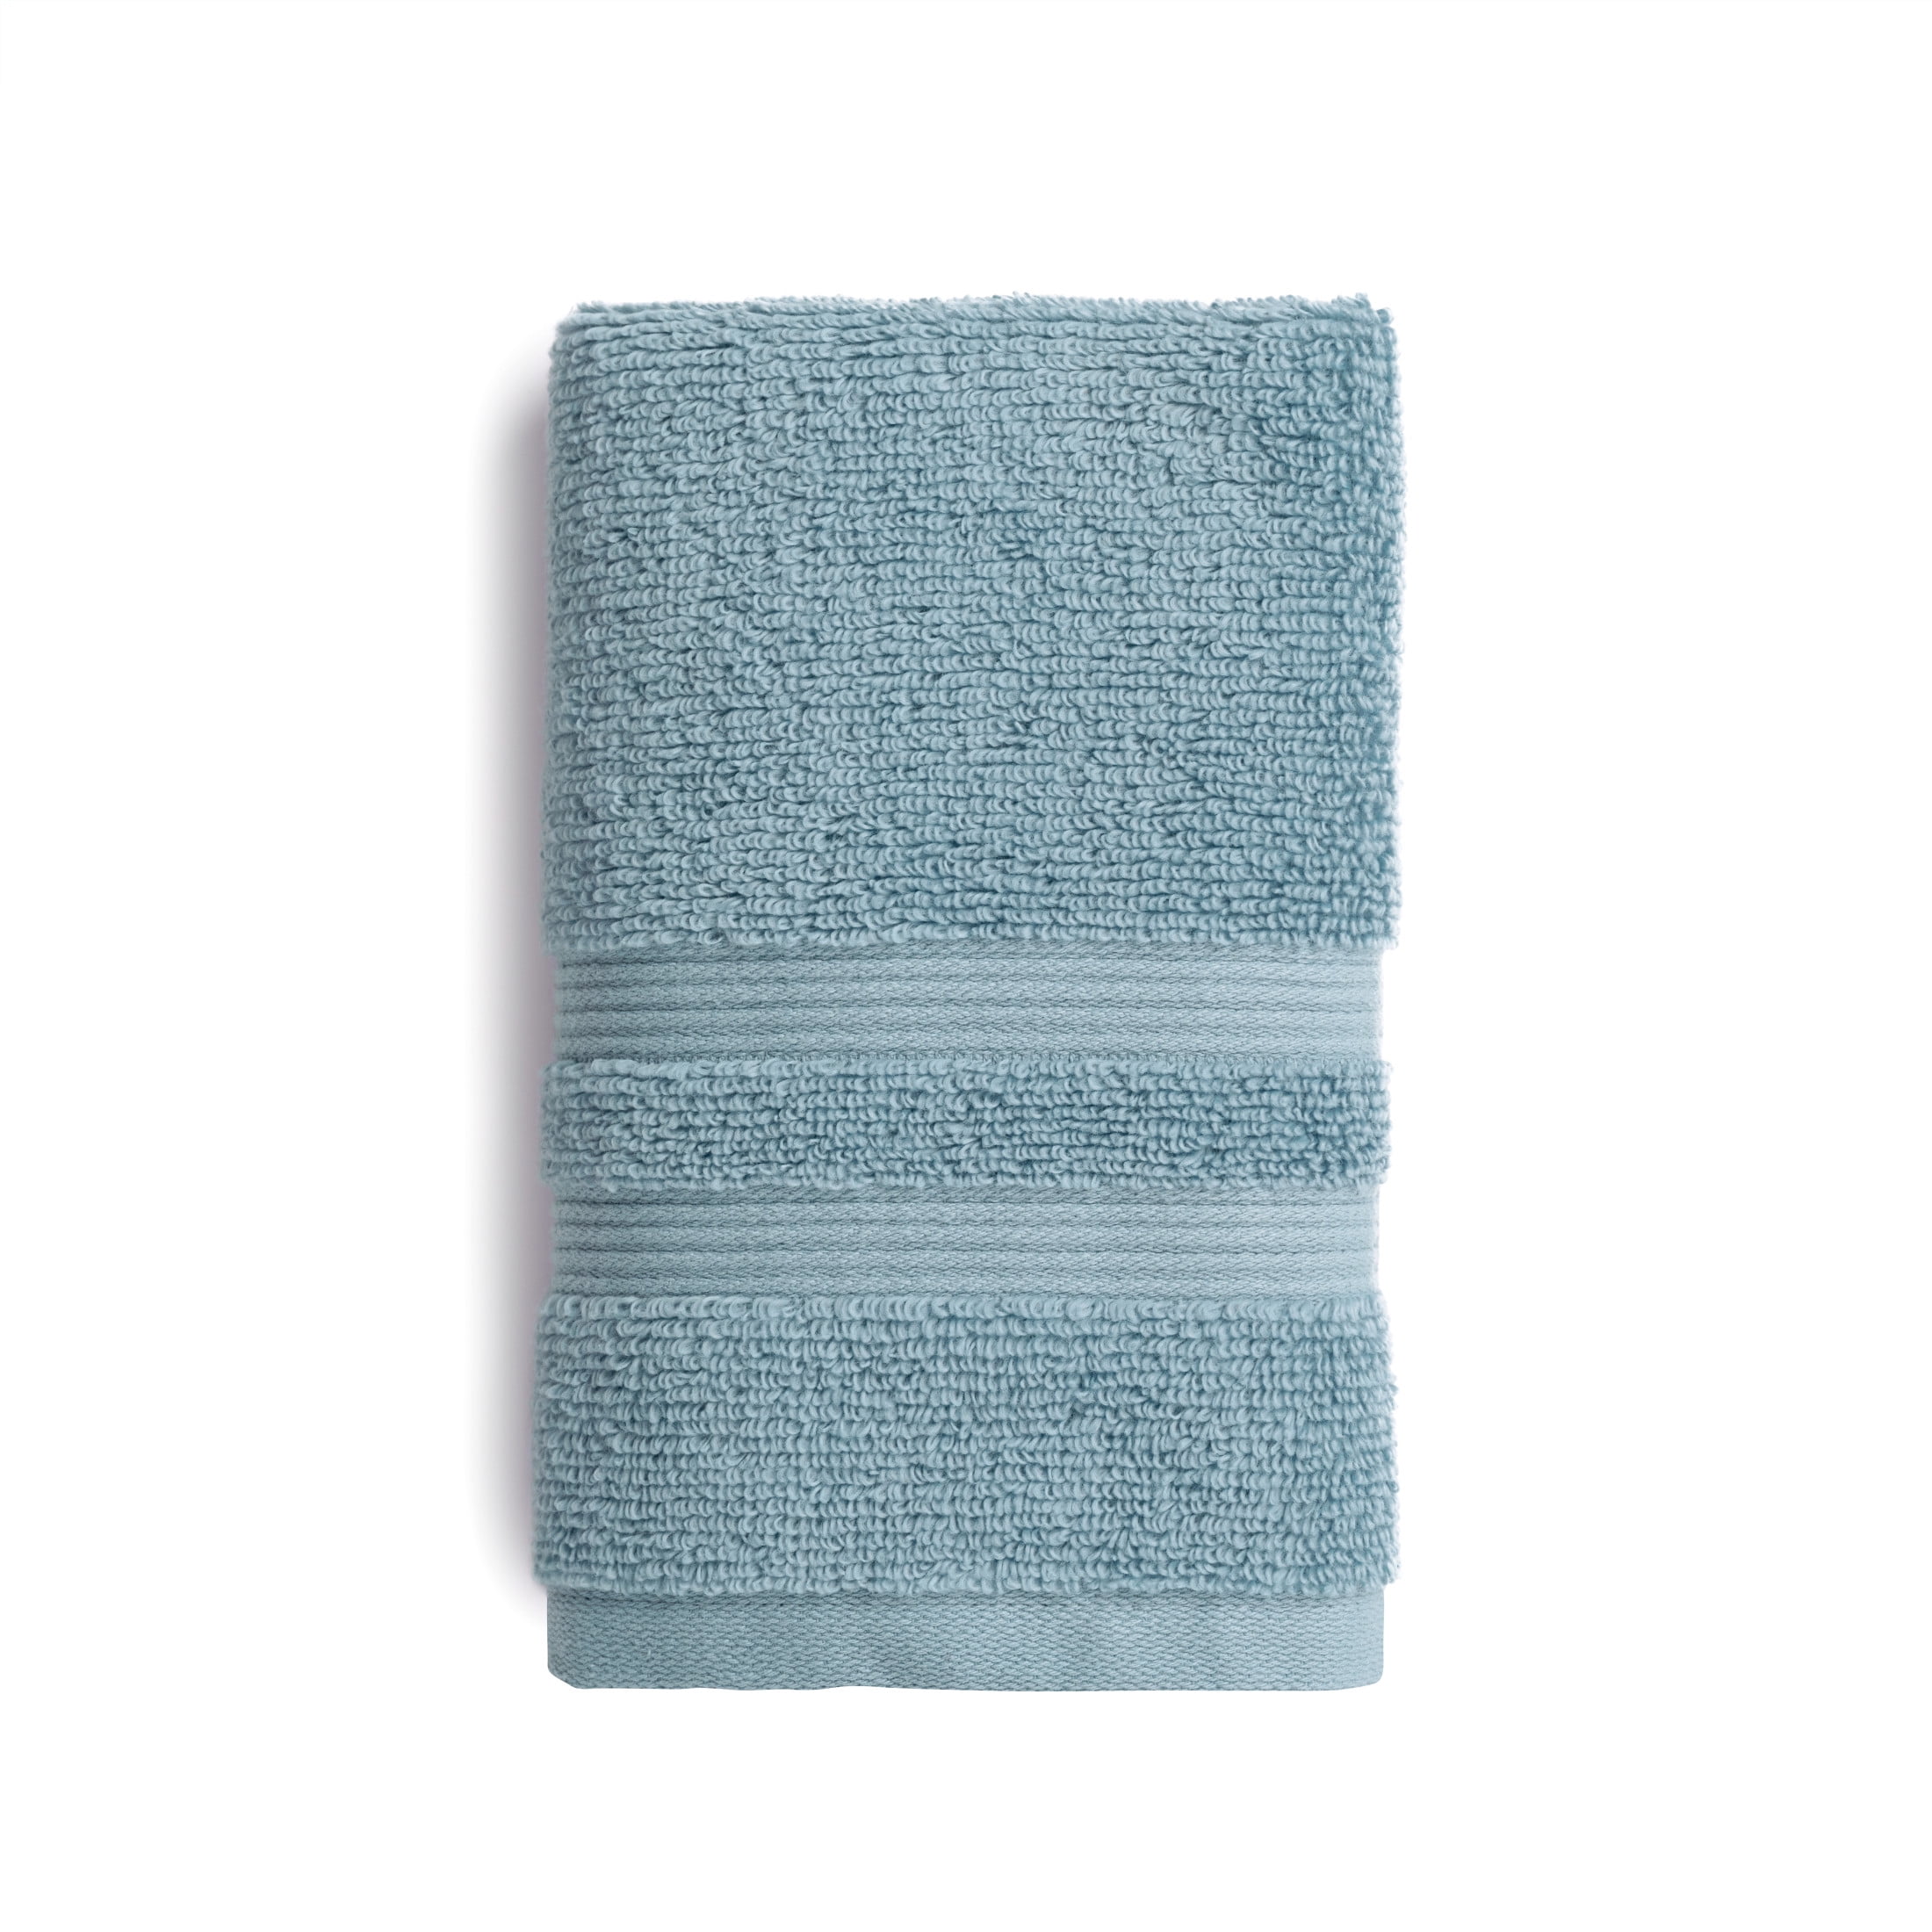 Performance Solid Hand Towel, 16 x 26, Blue Linen - Mainstays